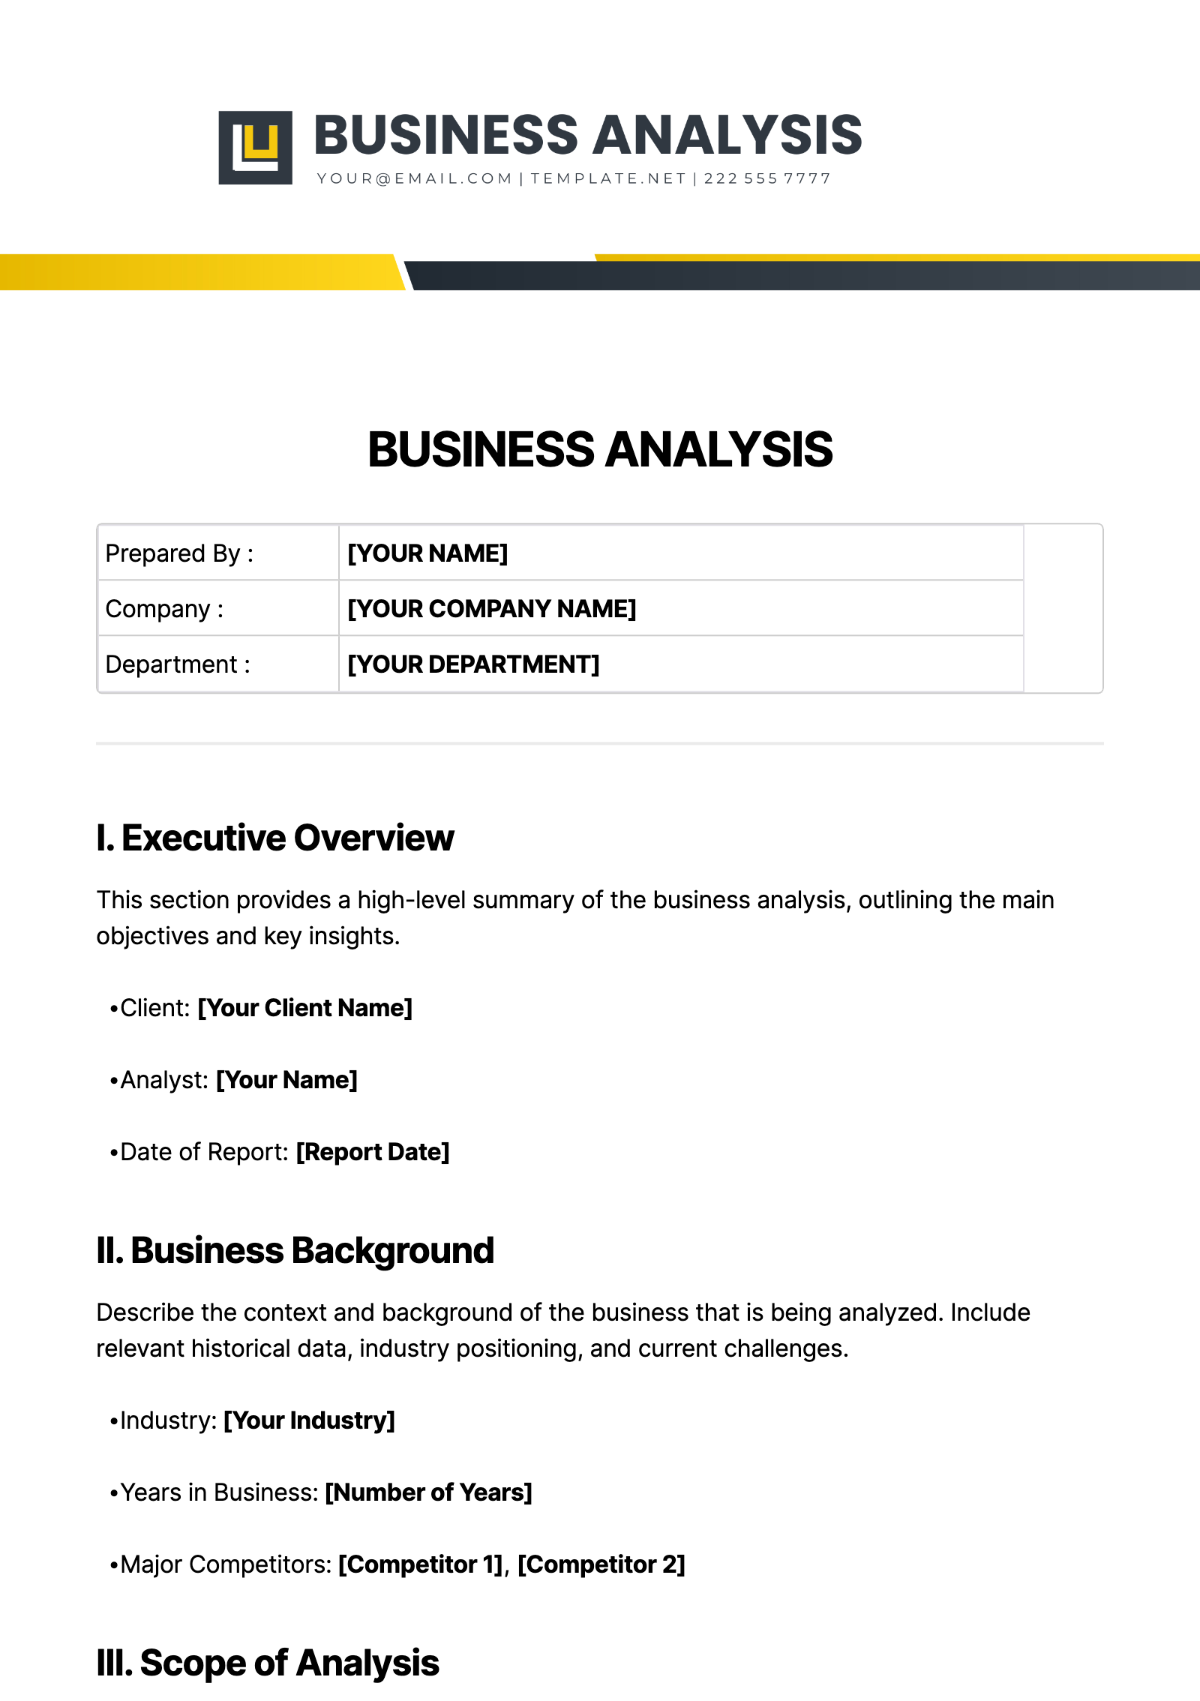 Business Analysis Template